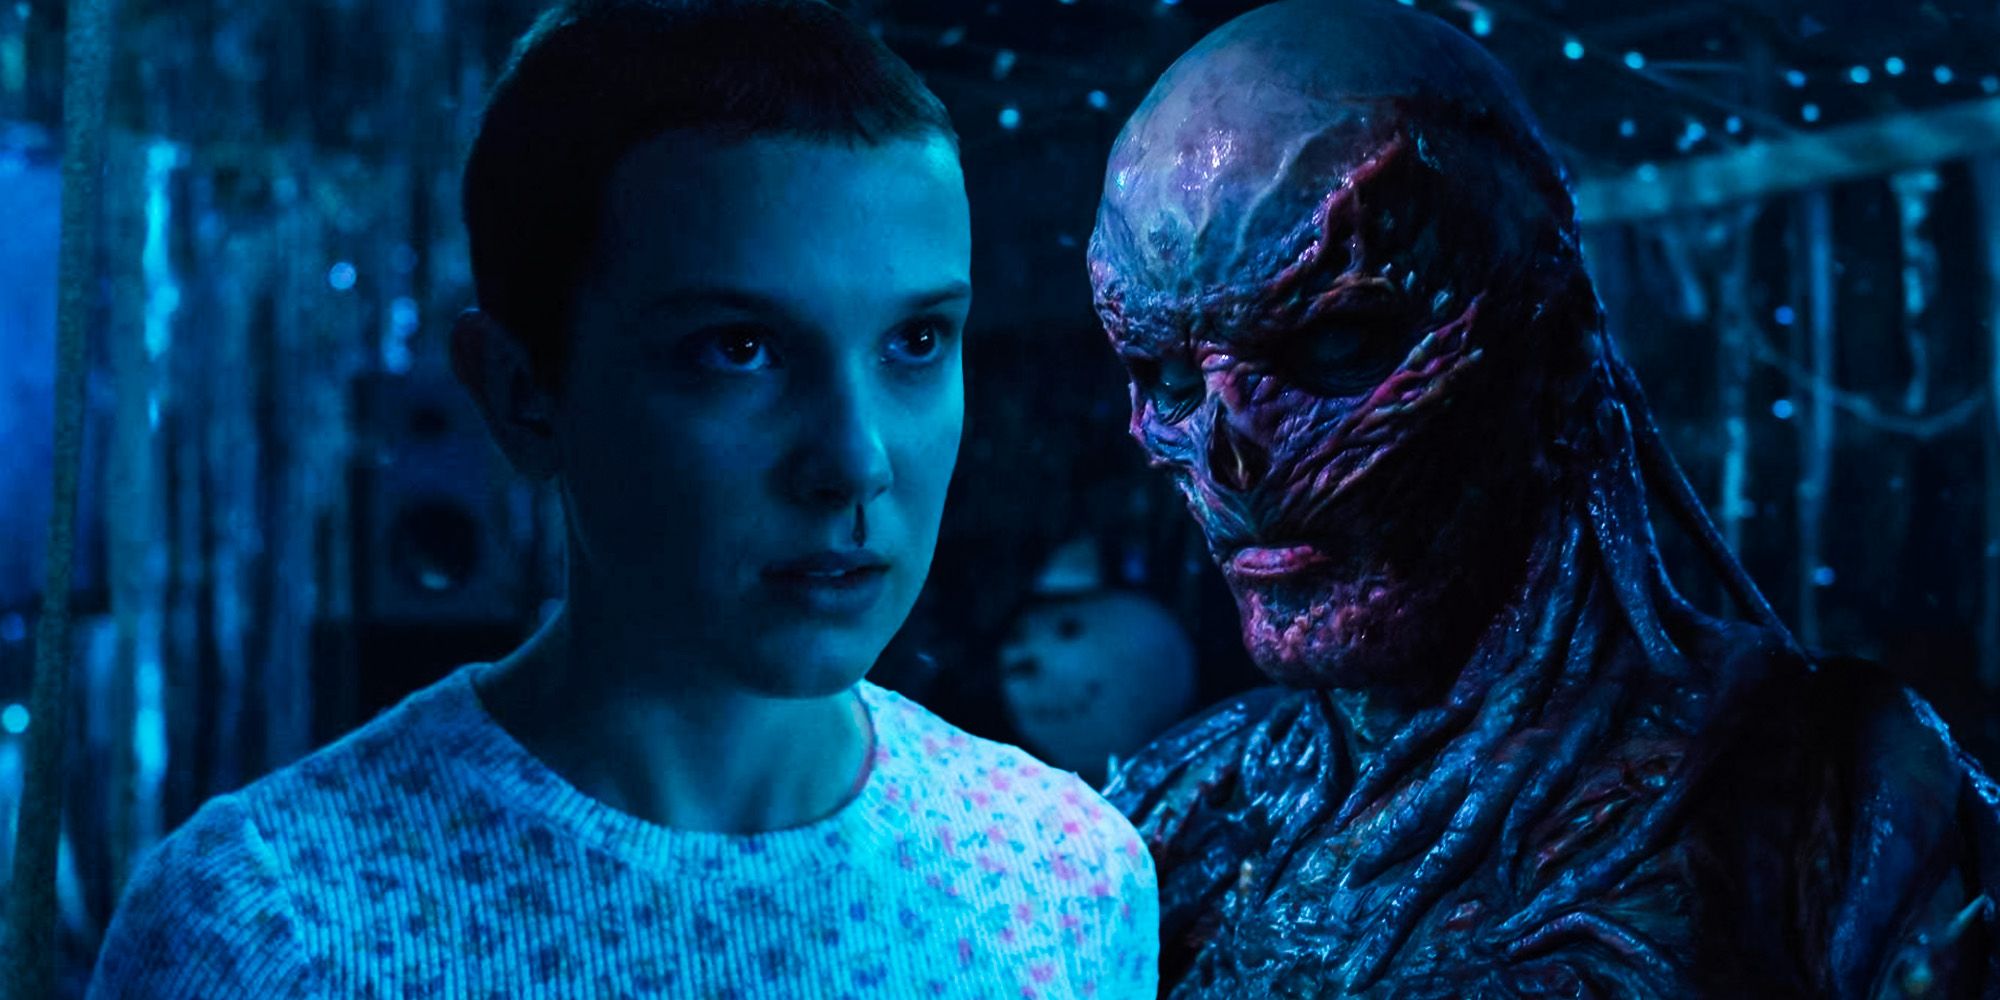 Does Will die in Stranger Things? What happens to Will?